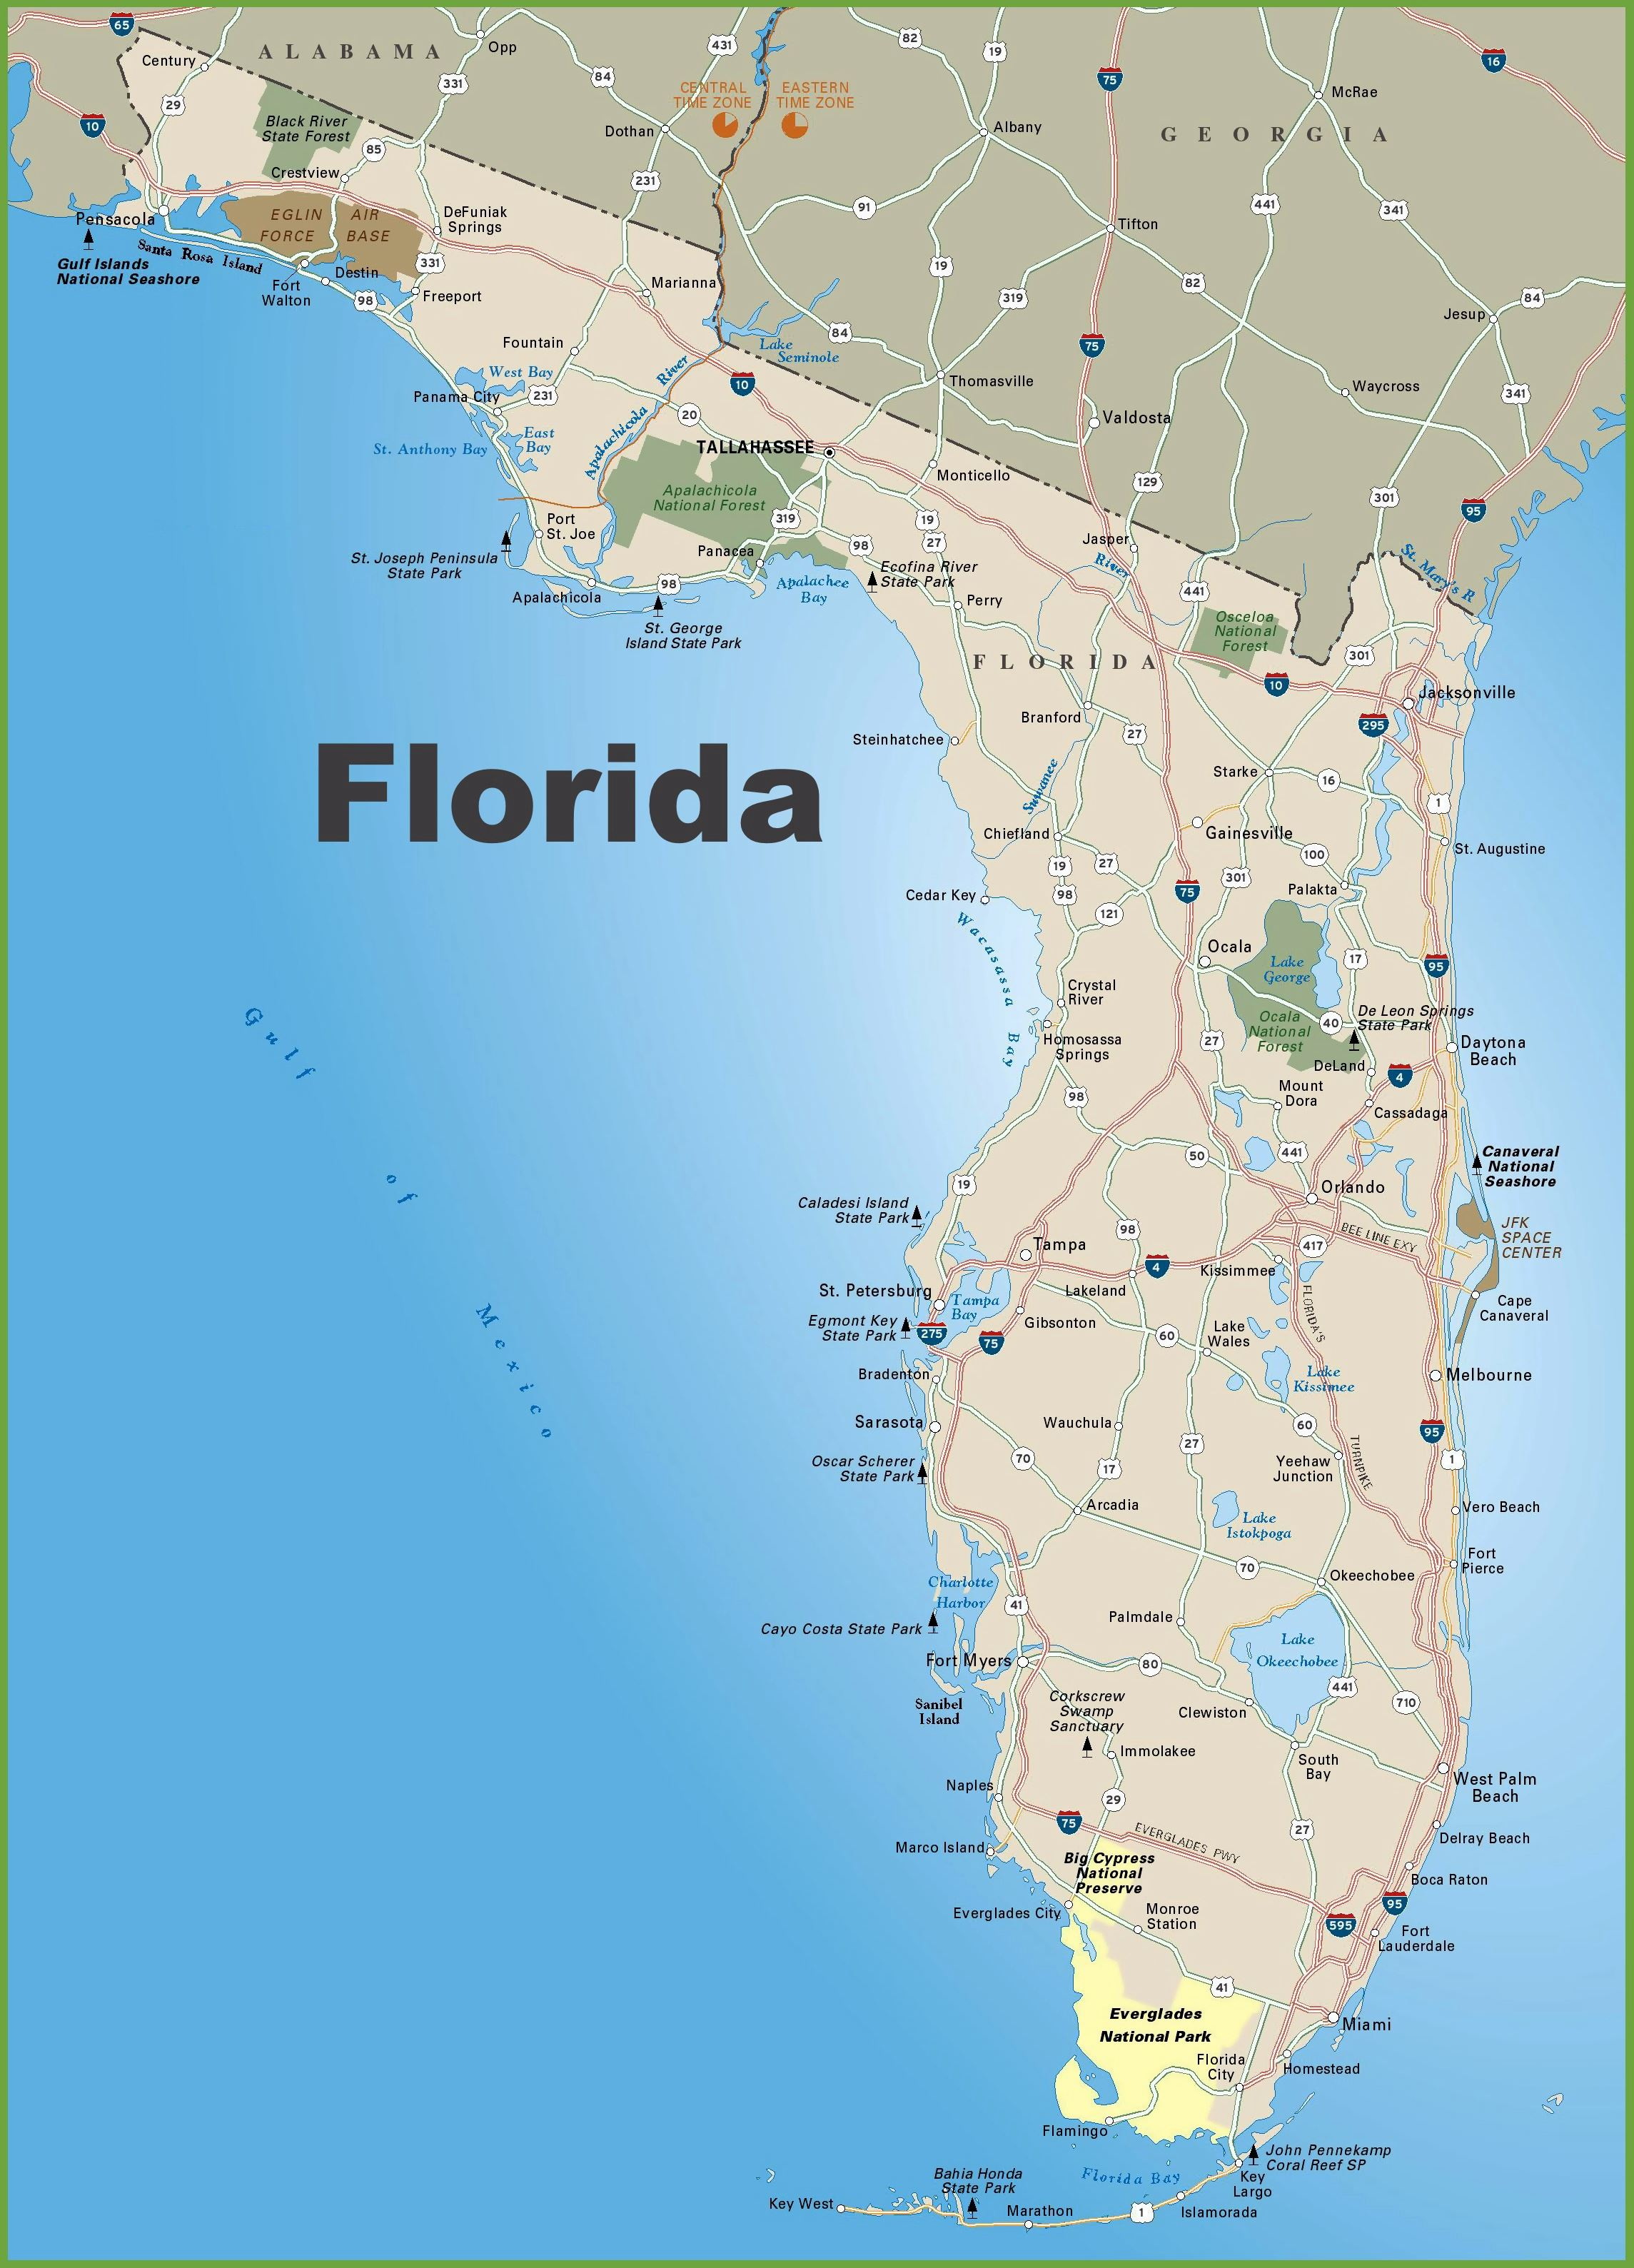 Large Florida Maps For Free Download And Print | High-Resolution And - Road Map Of Lake County Florida